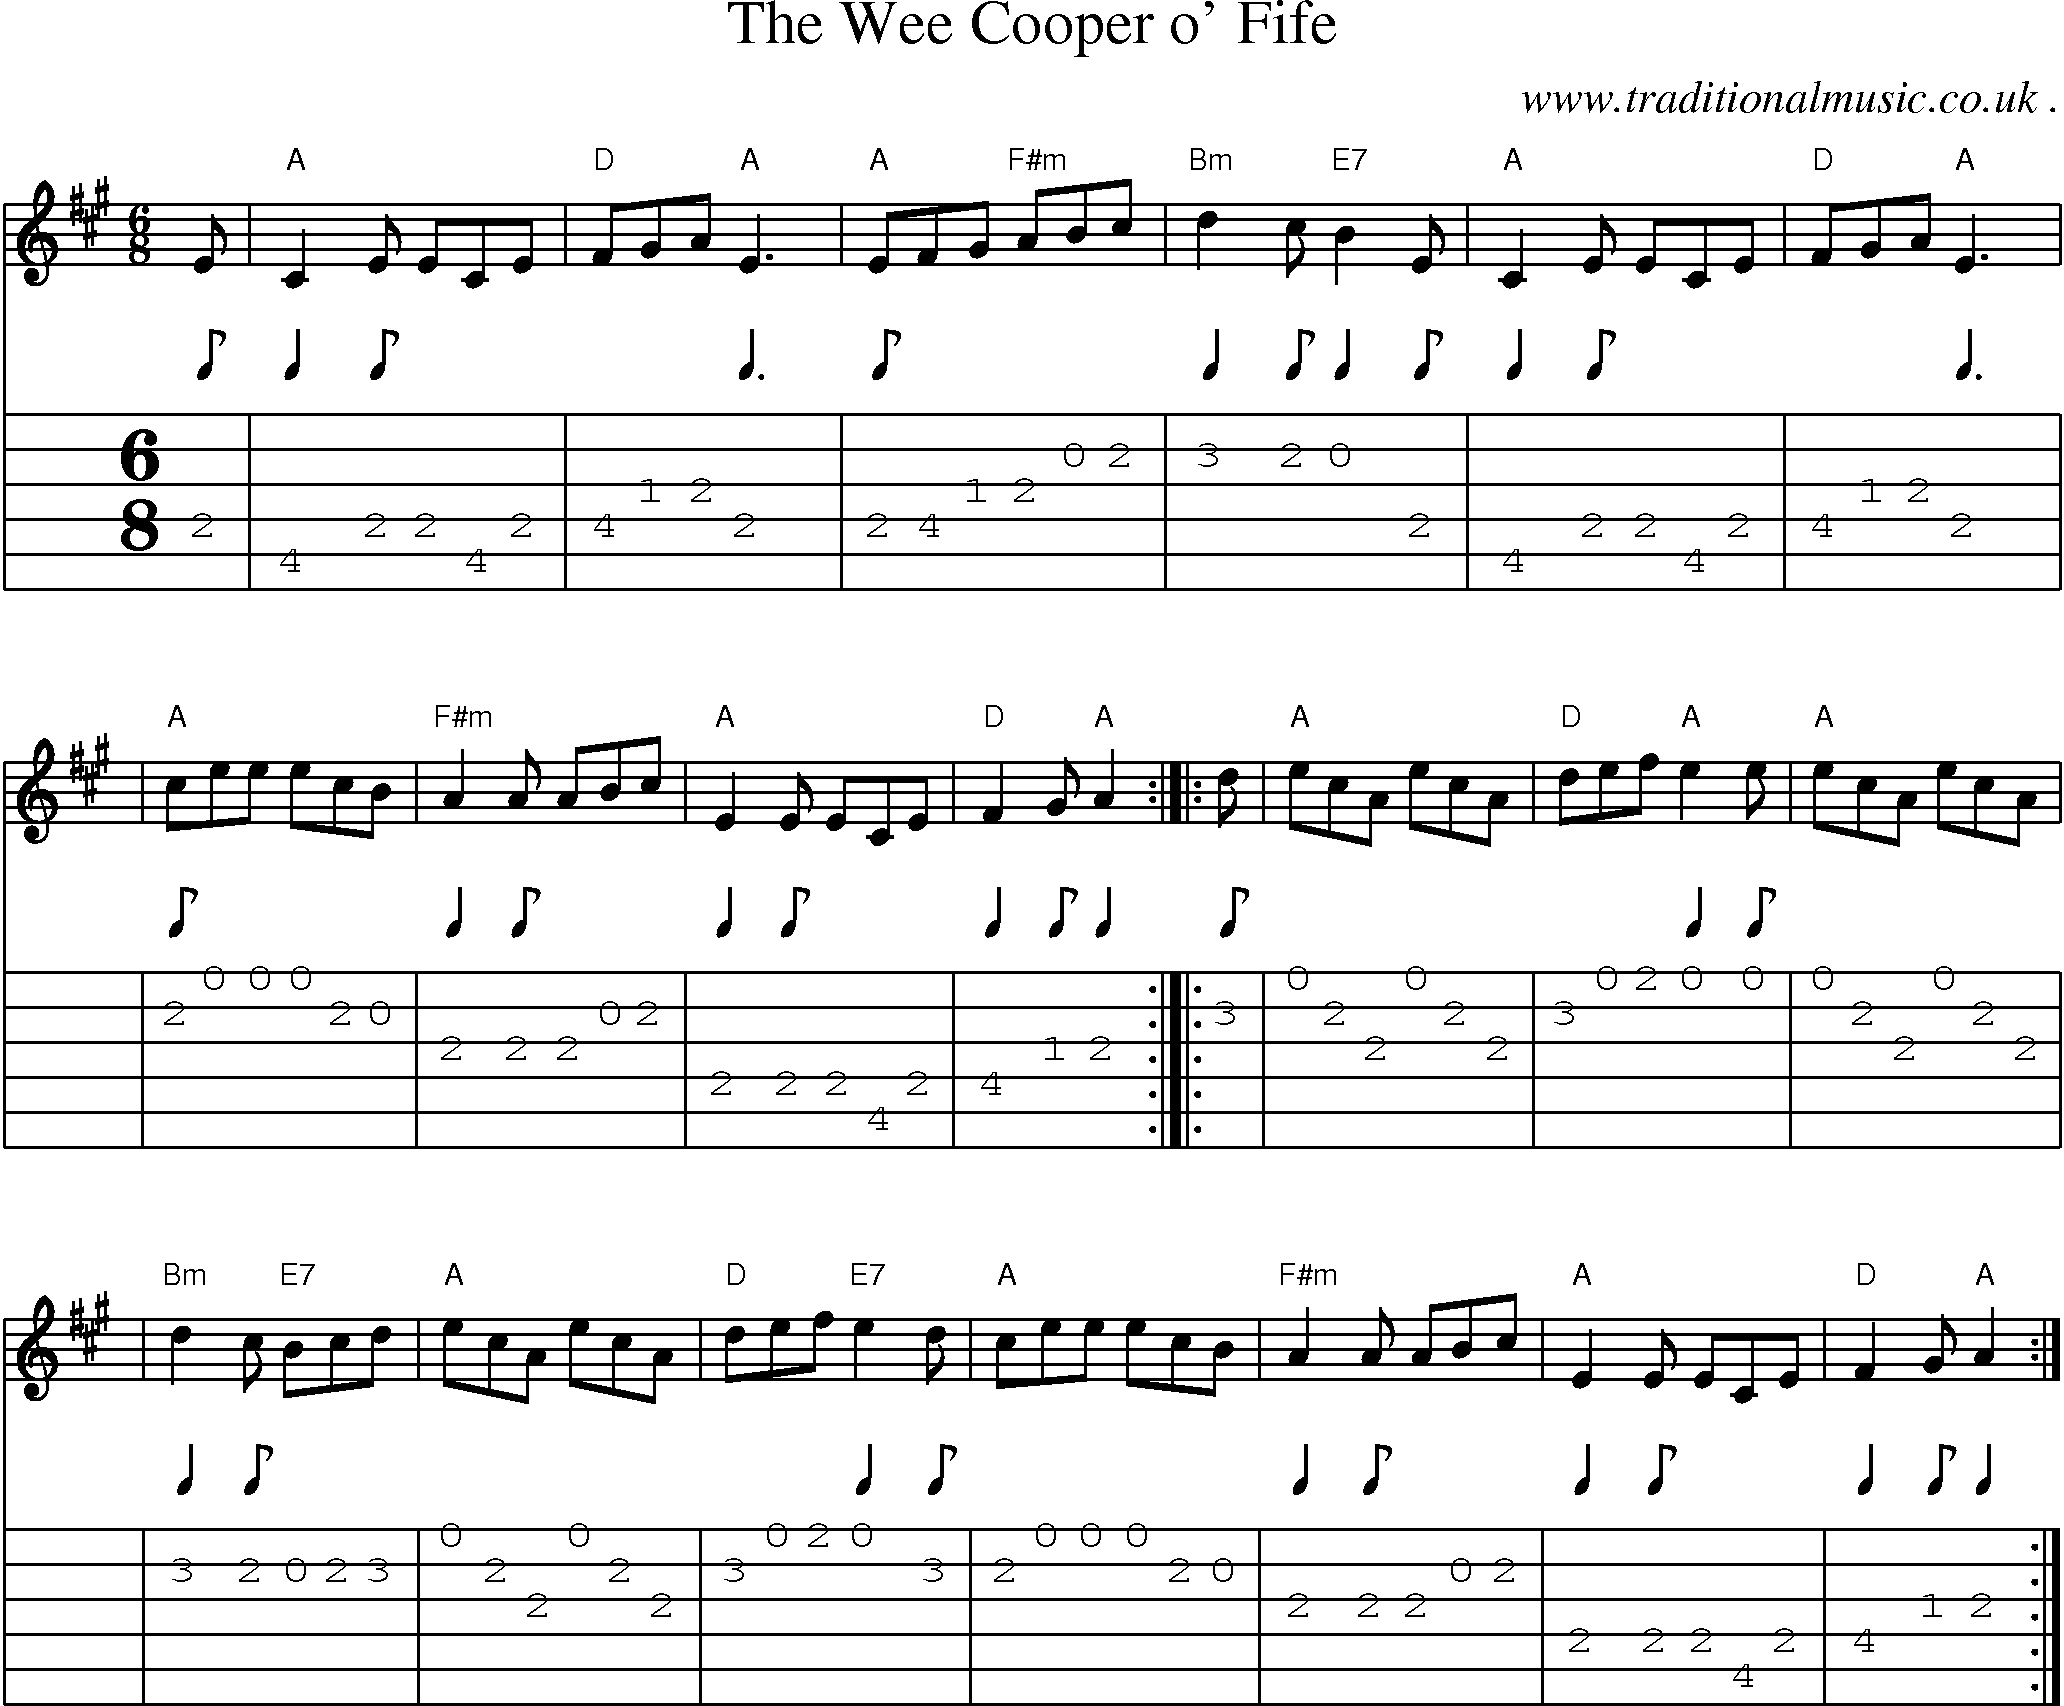 Sheet-music  score, Chords and Guitar Tabs for The Wee Cooper O Fife